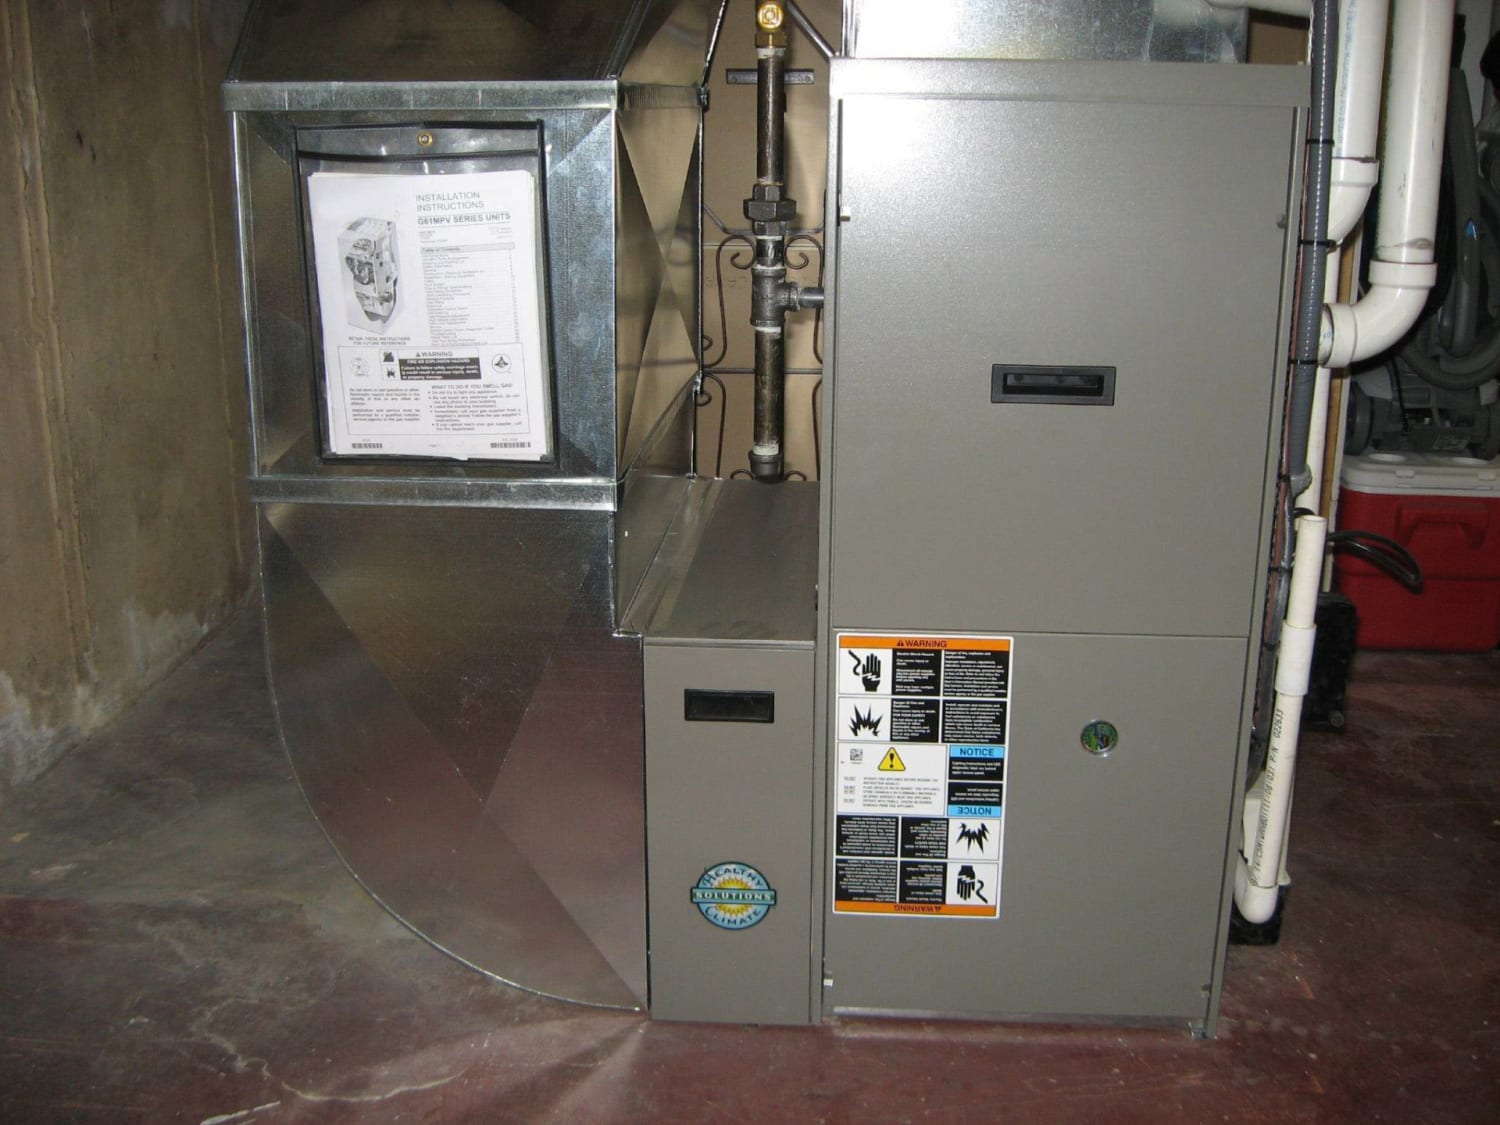 What Are The Different Types of Furnaces?